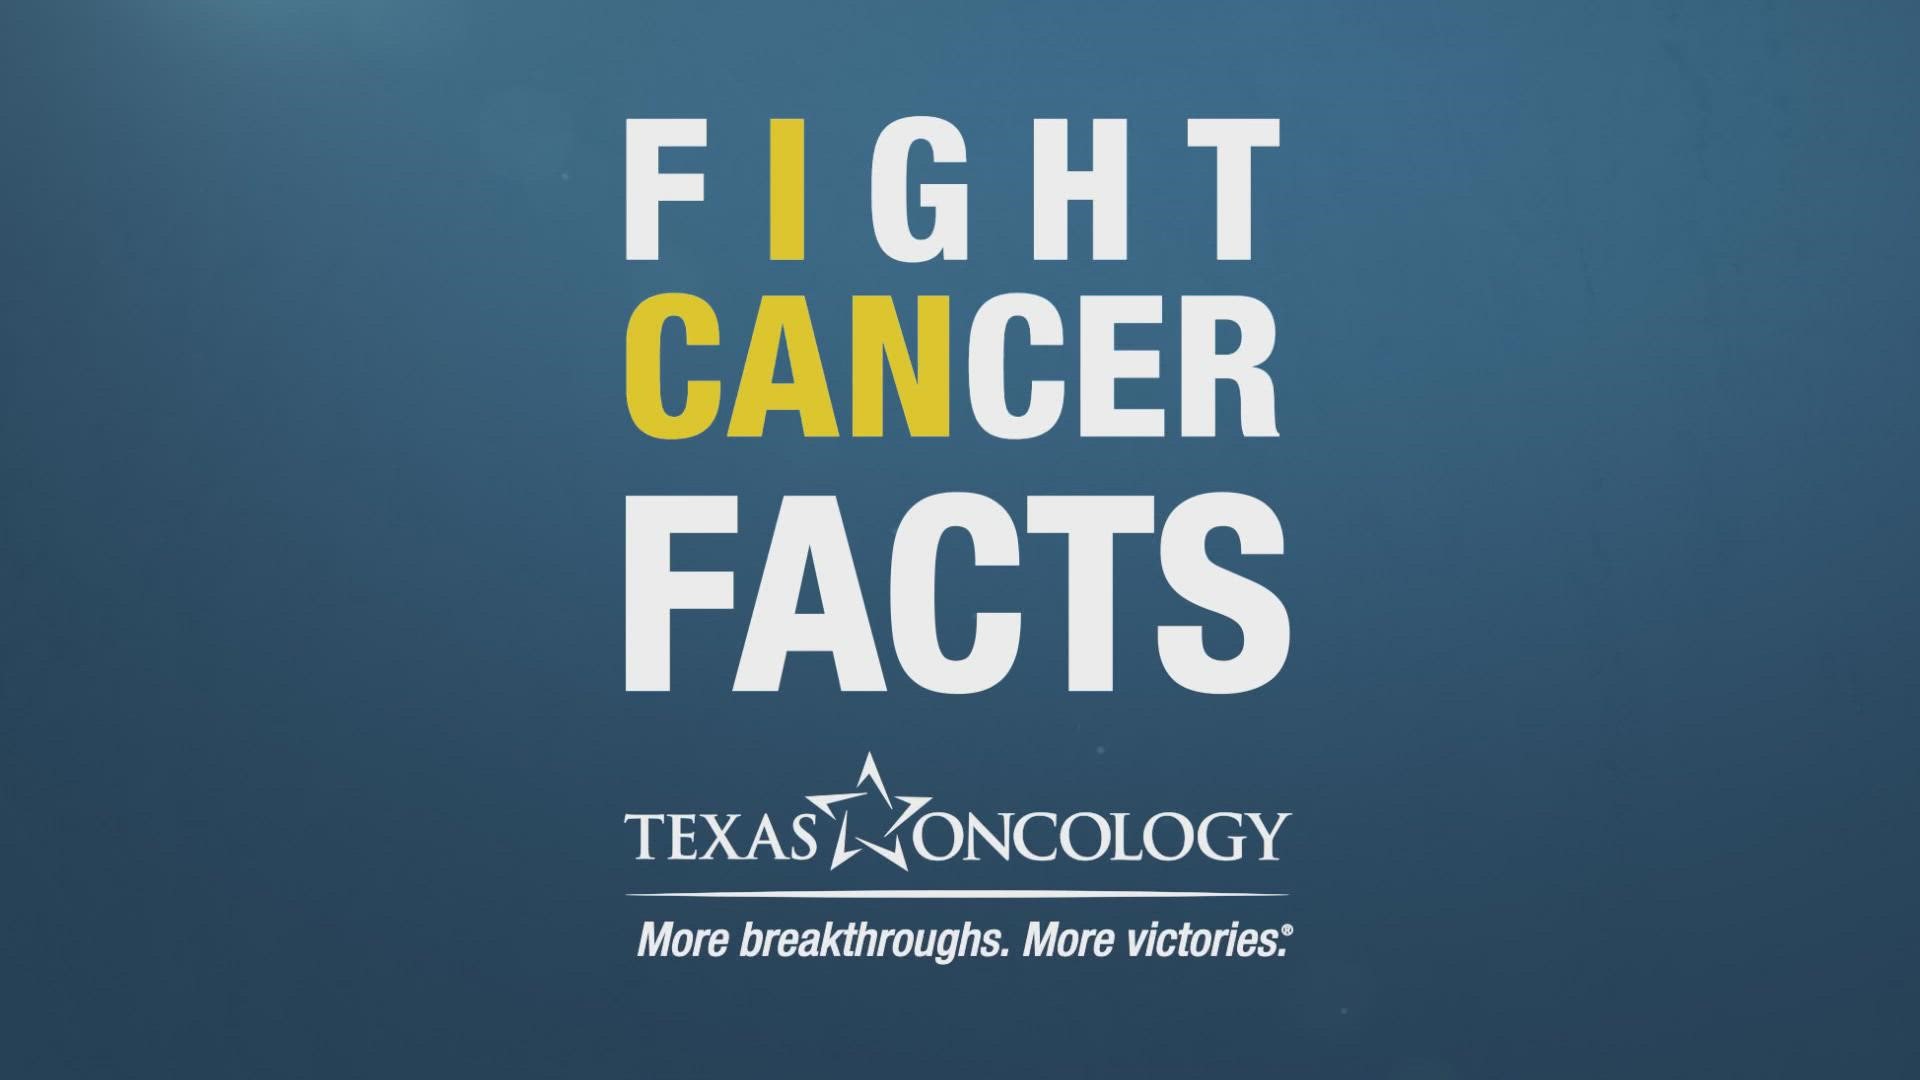 Local Texas Oncology doctor explains how personal and family history may increase the risk of developing gynecologic cancers.